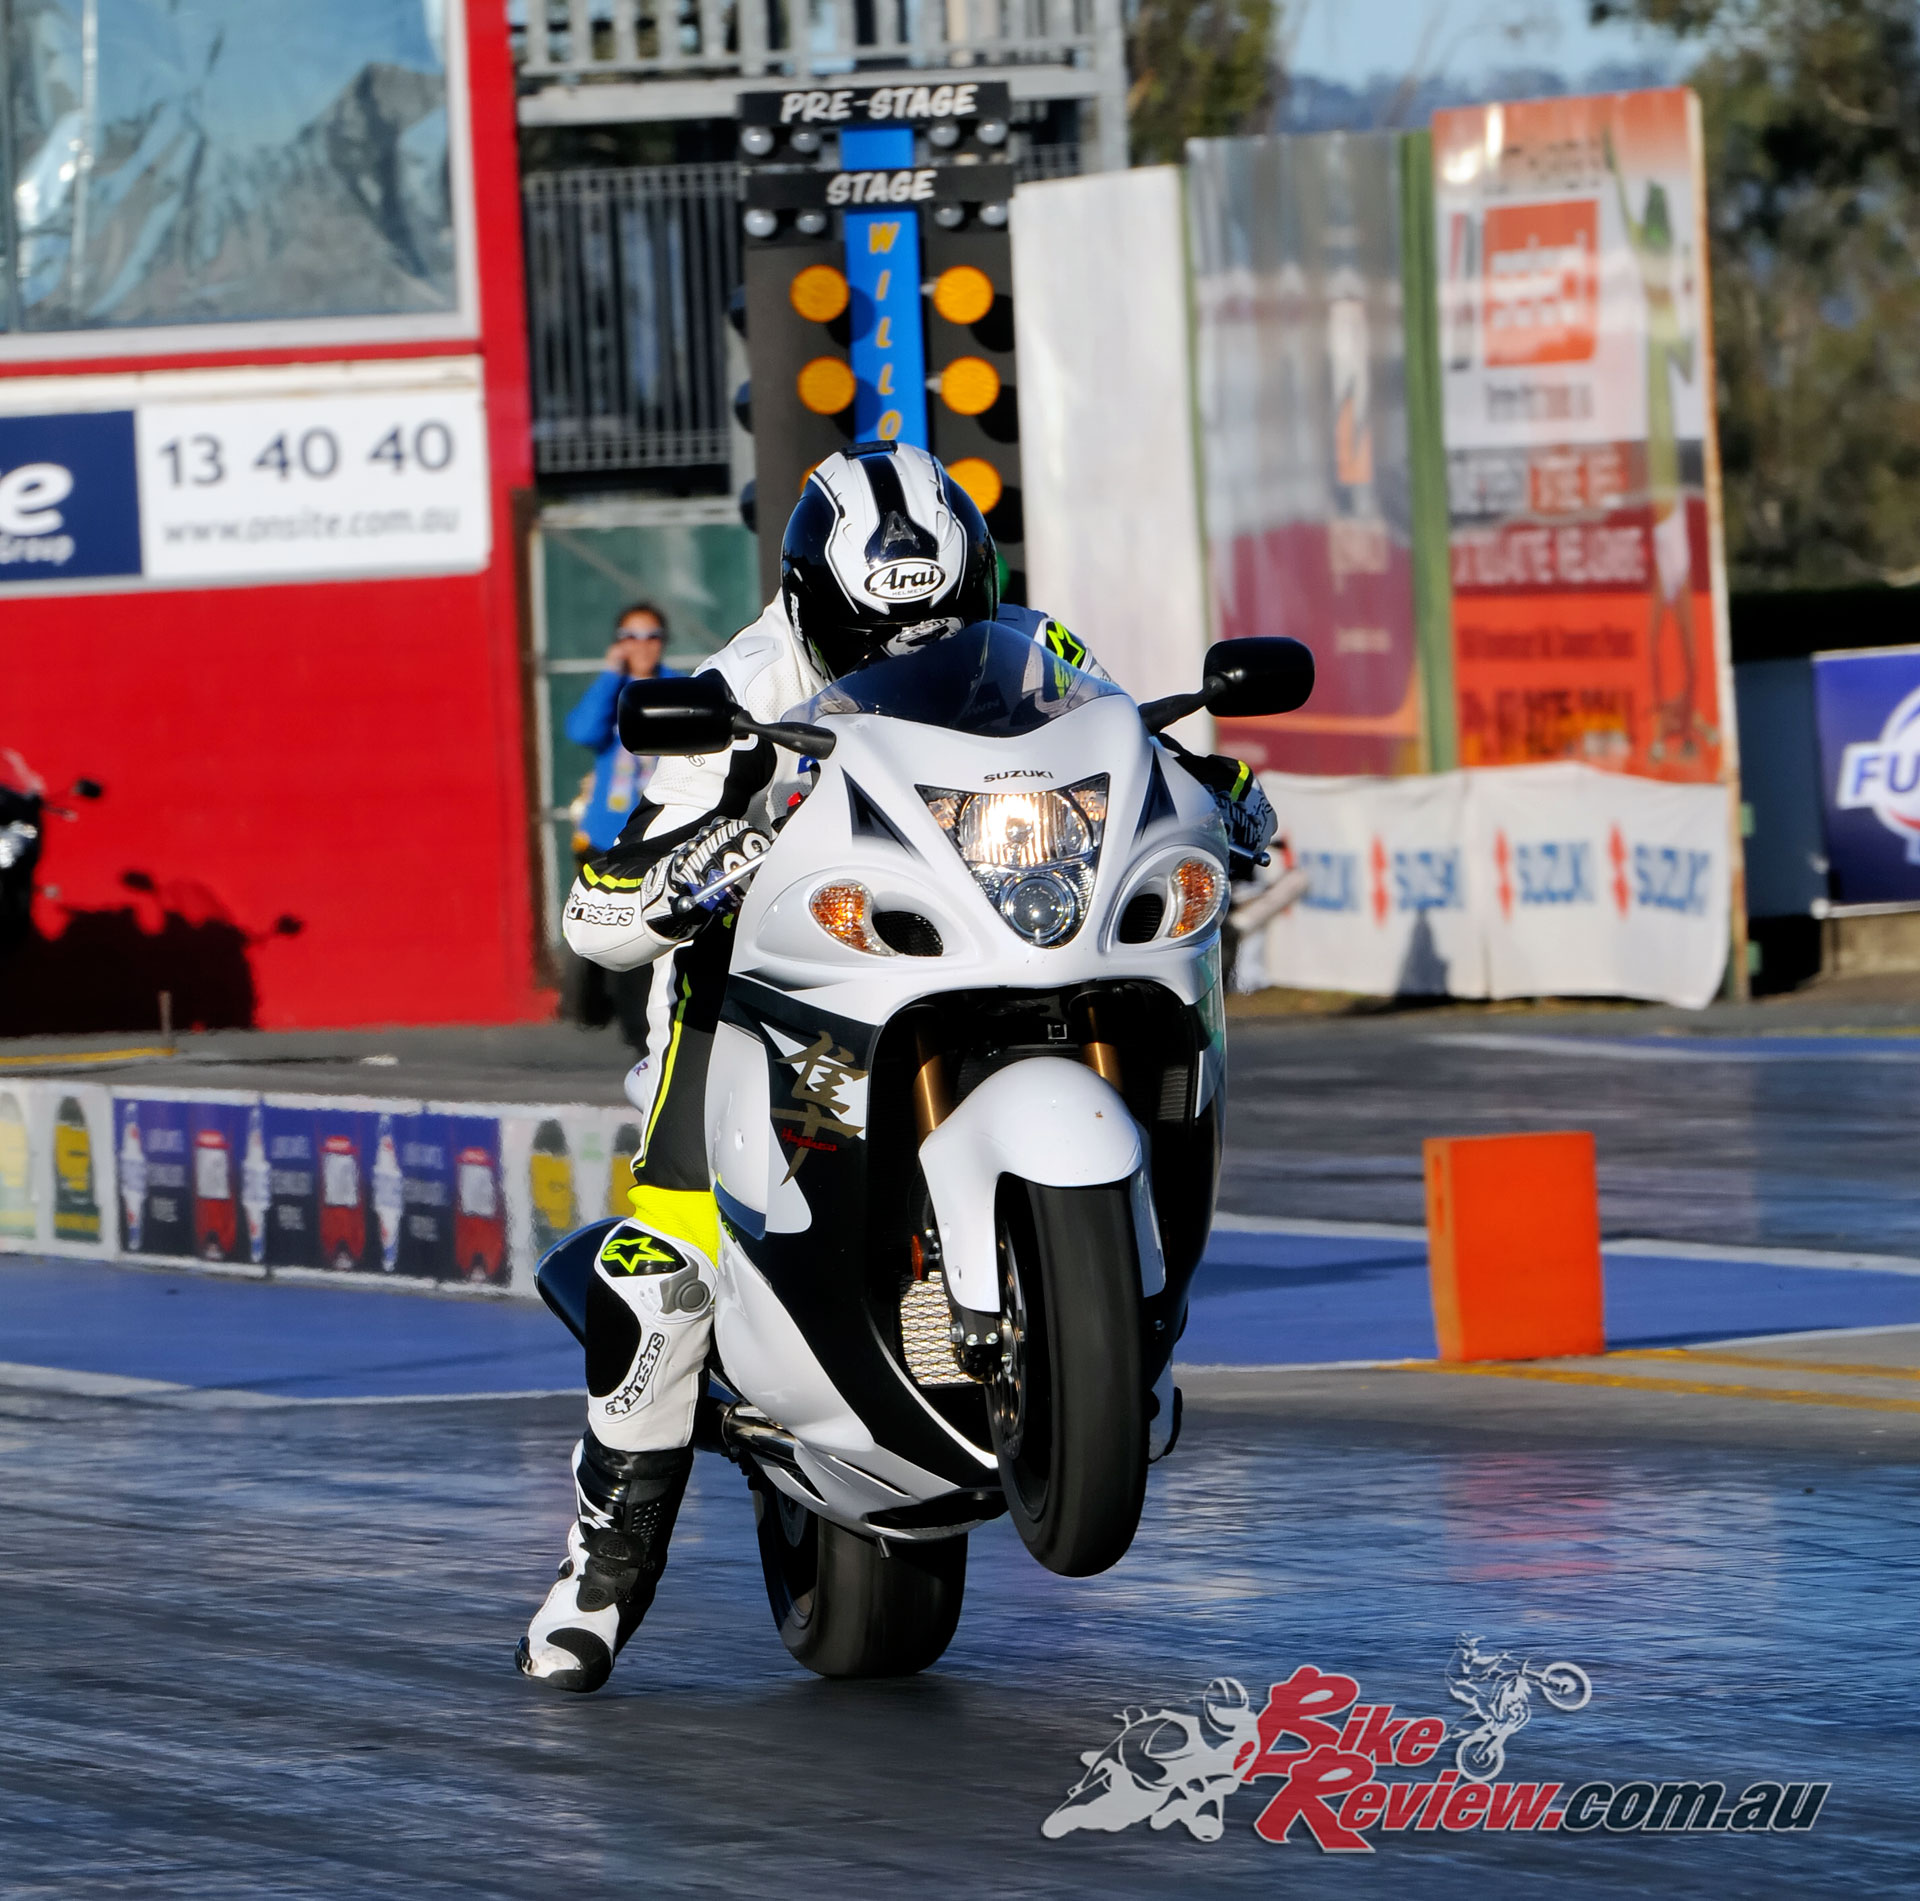 What better place to launch an updated Hayabusa than at the drag strip